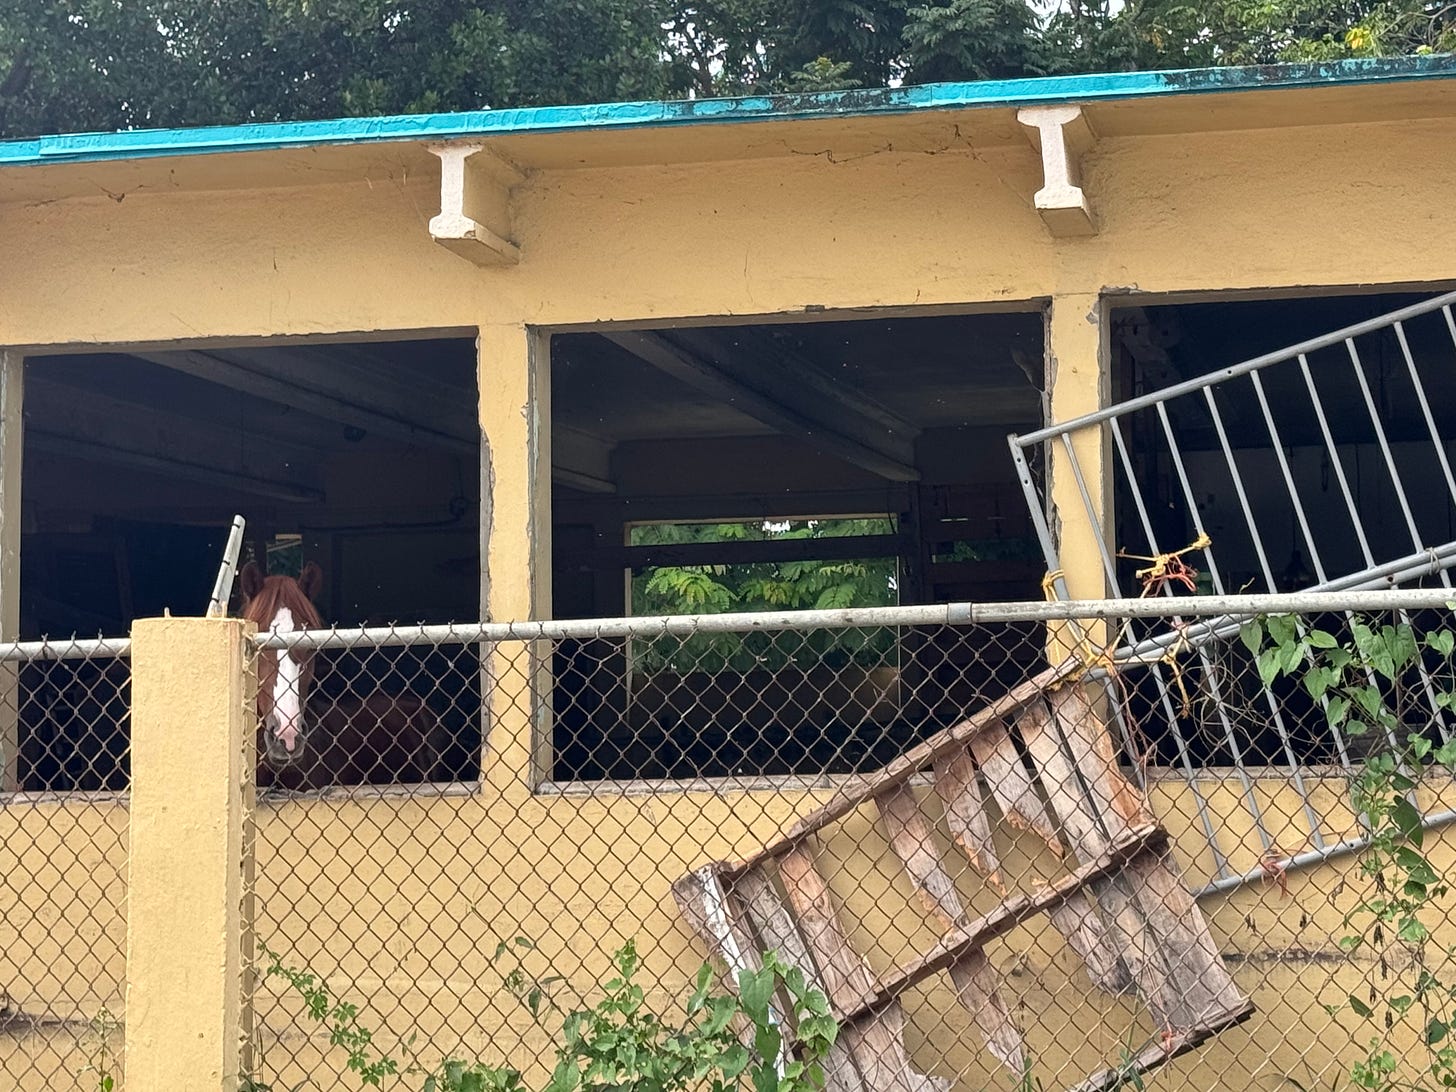 a brown horse with white on its muzzle looks out from a yellow stable that is in disrepair